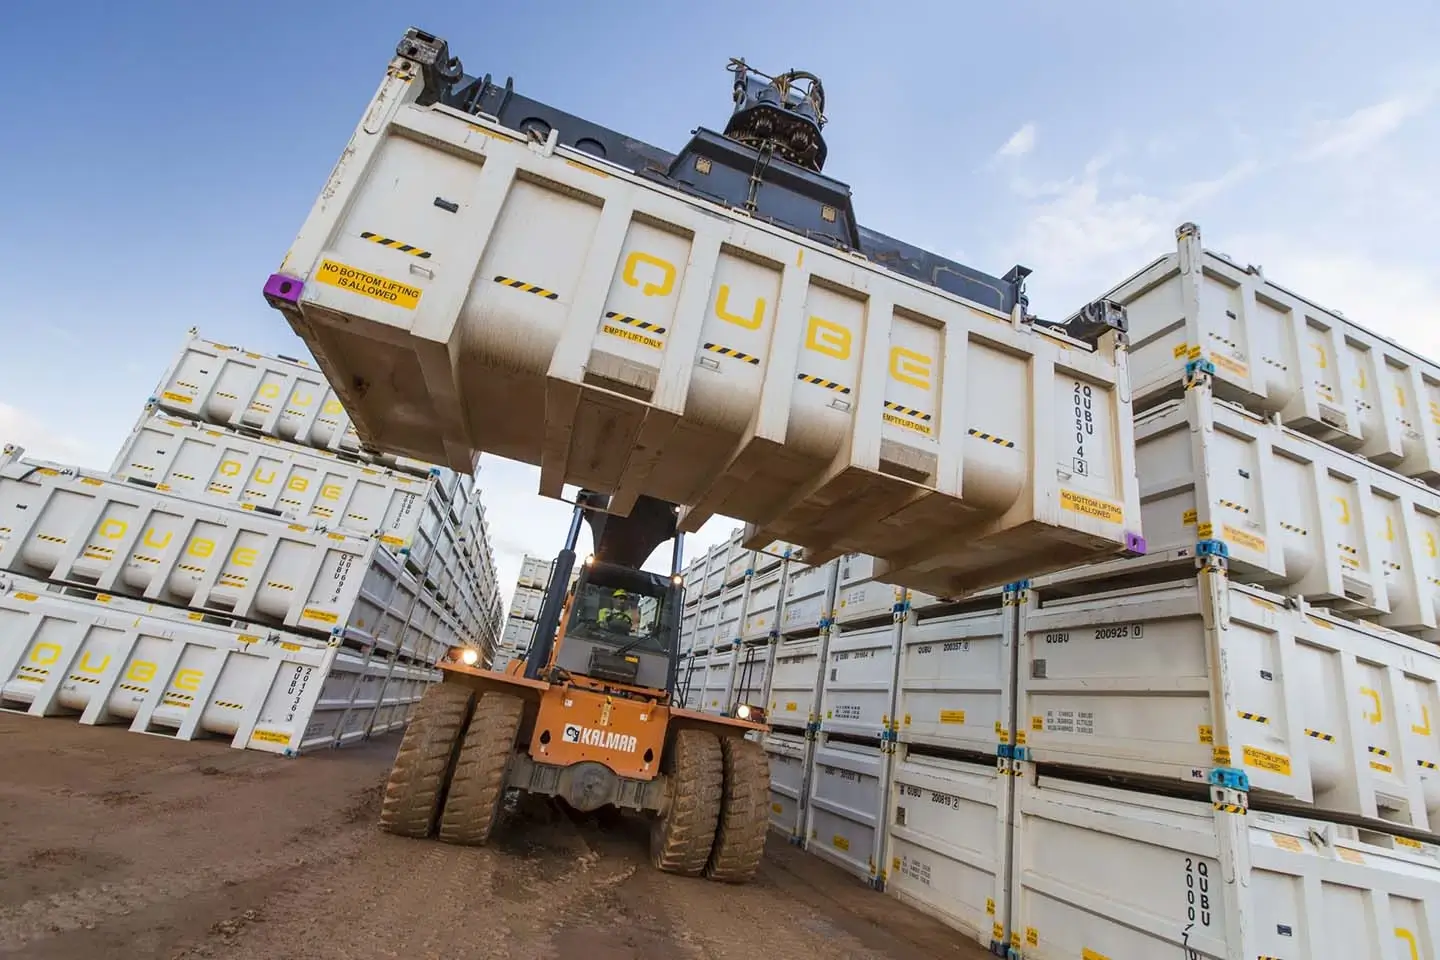 Qube container being carried by forklift